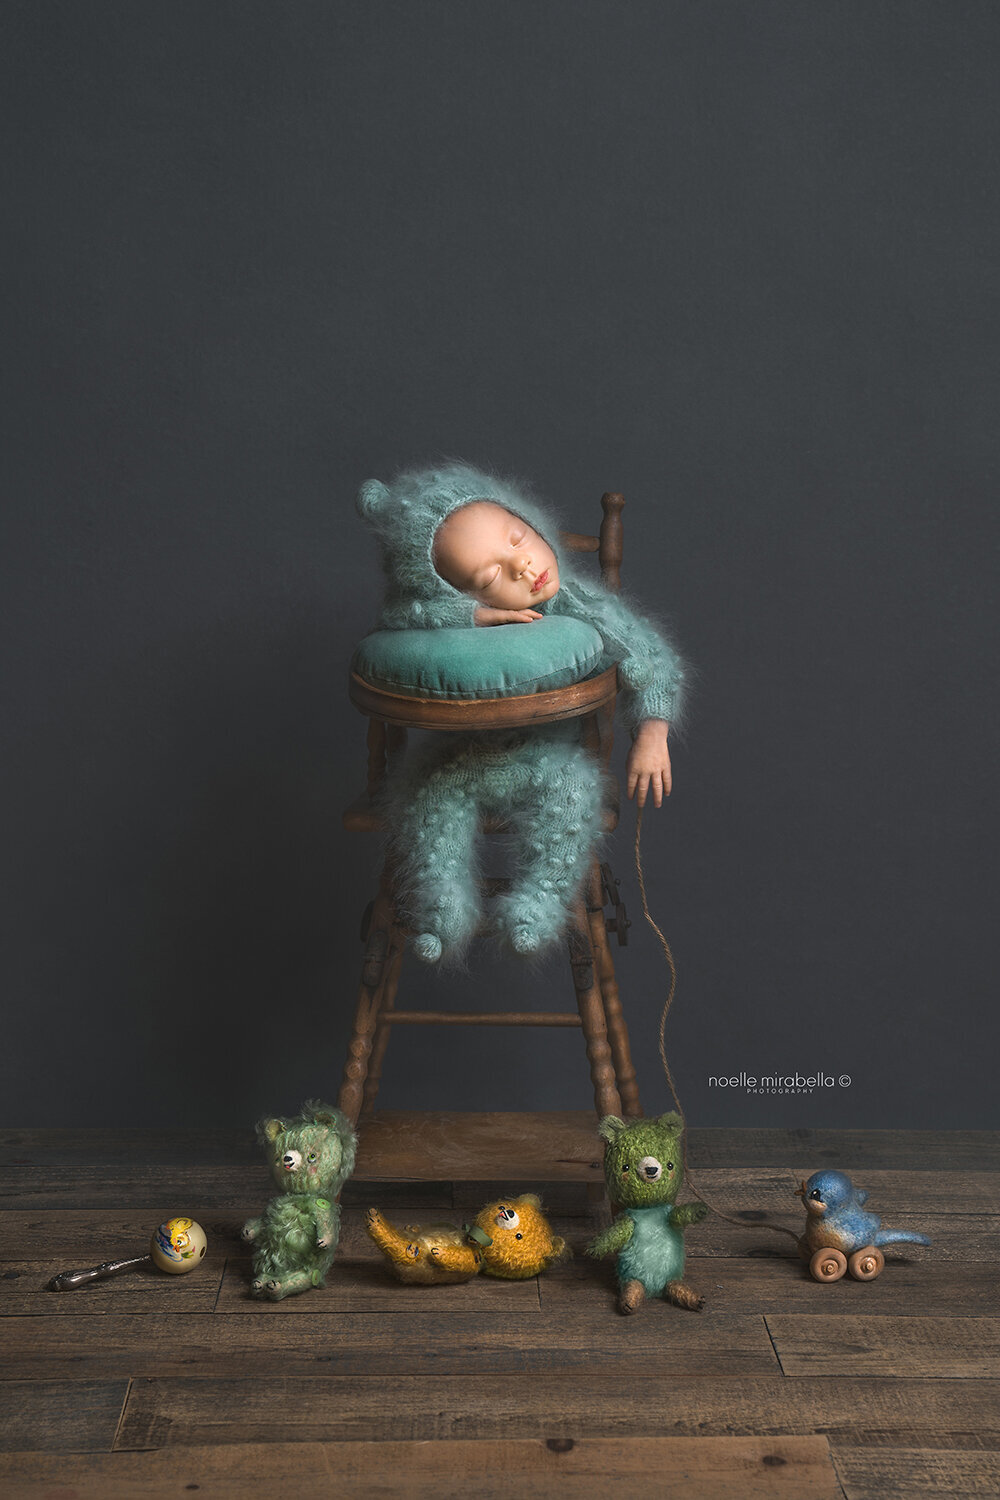 Newborn baby sleeping in vintage wooden high chair with vintage toys and vintage style bears.